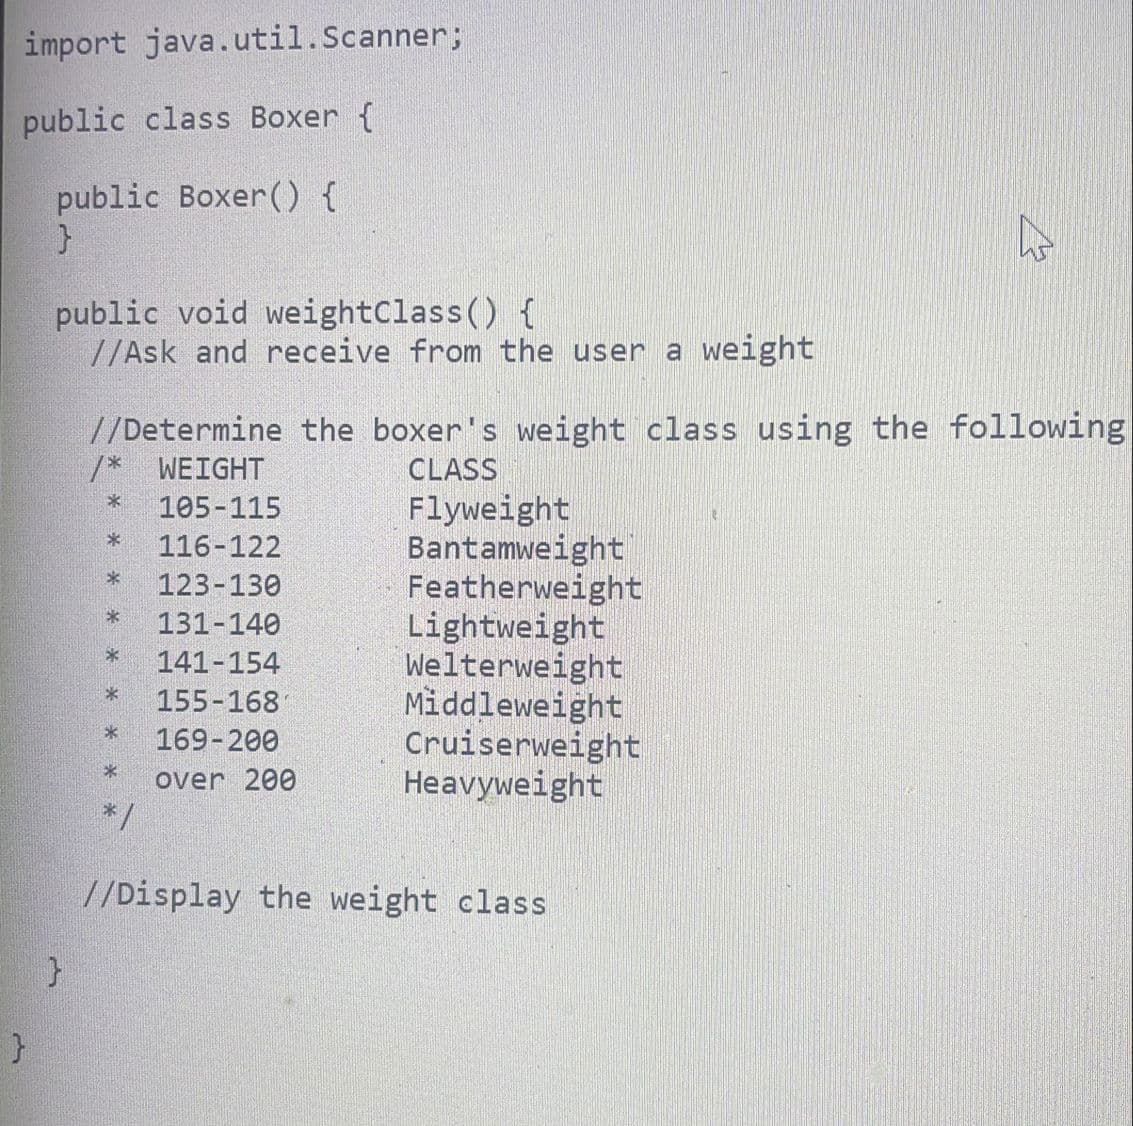 import java.util.Scanner;
public class Boxer {
public Boxer() {
}
public void weightClass() {
//Ask and receive from the user a weight
}
//Determine the boxer's weight class using the following
/* WEIGHT
CLASS
*
105-115
116-122
123-130
* 131-140
141-154
155-168
169-200
over 200
*
*
*
*/
Flyweight
Bantamweight
Featherweight
Lightweight
Welterweight
Middleweight
Cruiserweight
Heavyweight
☆
//Display the weight class